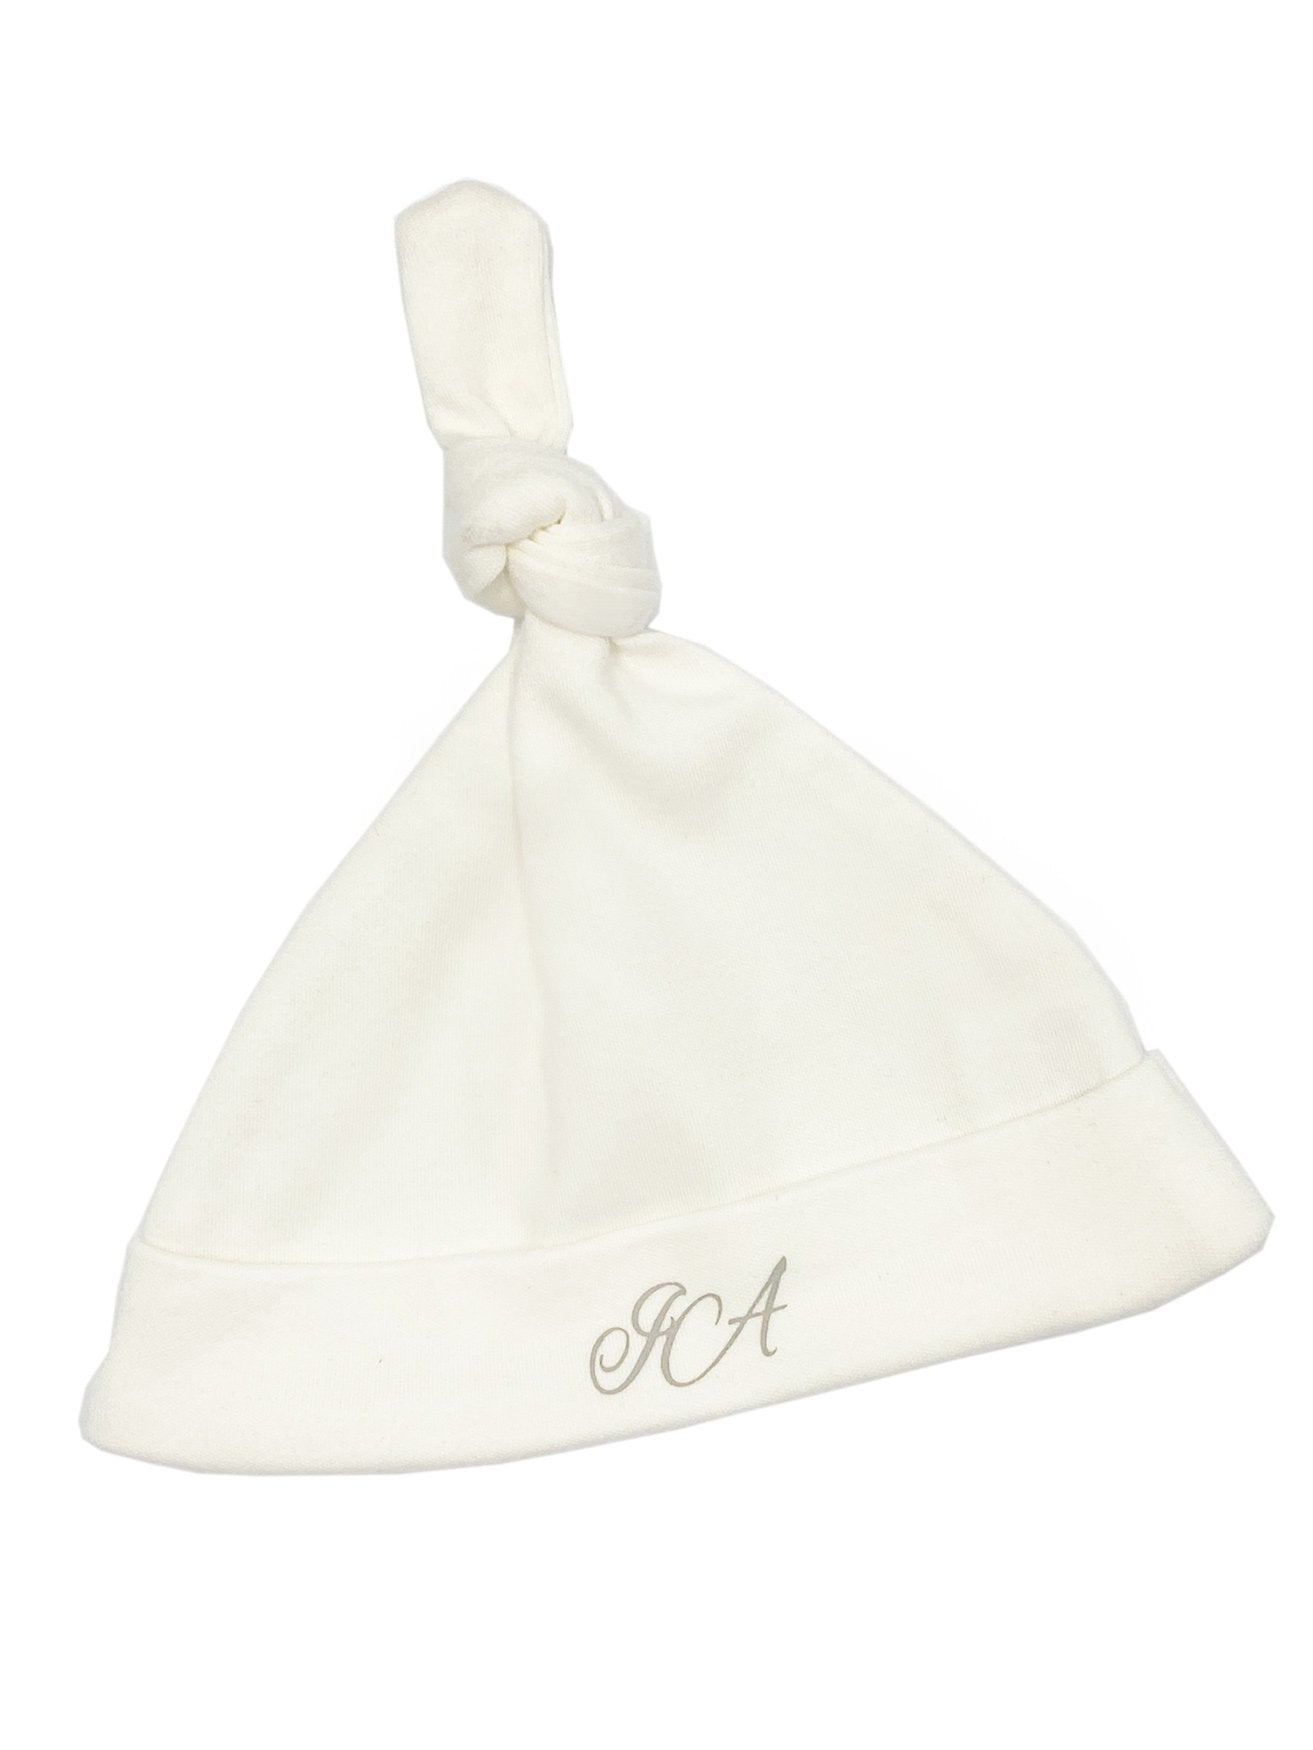 GOTS Certified Cotton Knotted Hat - Cream (3 Sizes) - Hat - Isaac Anthony